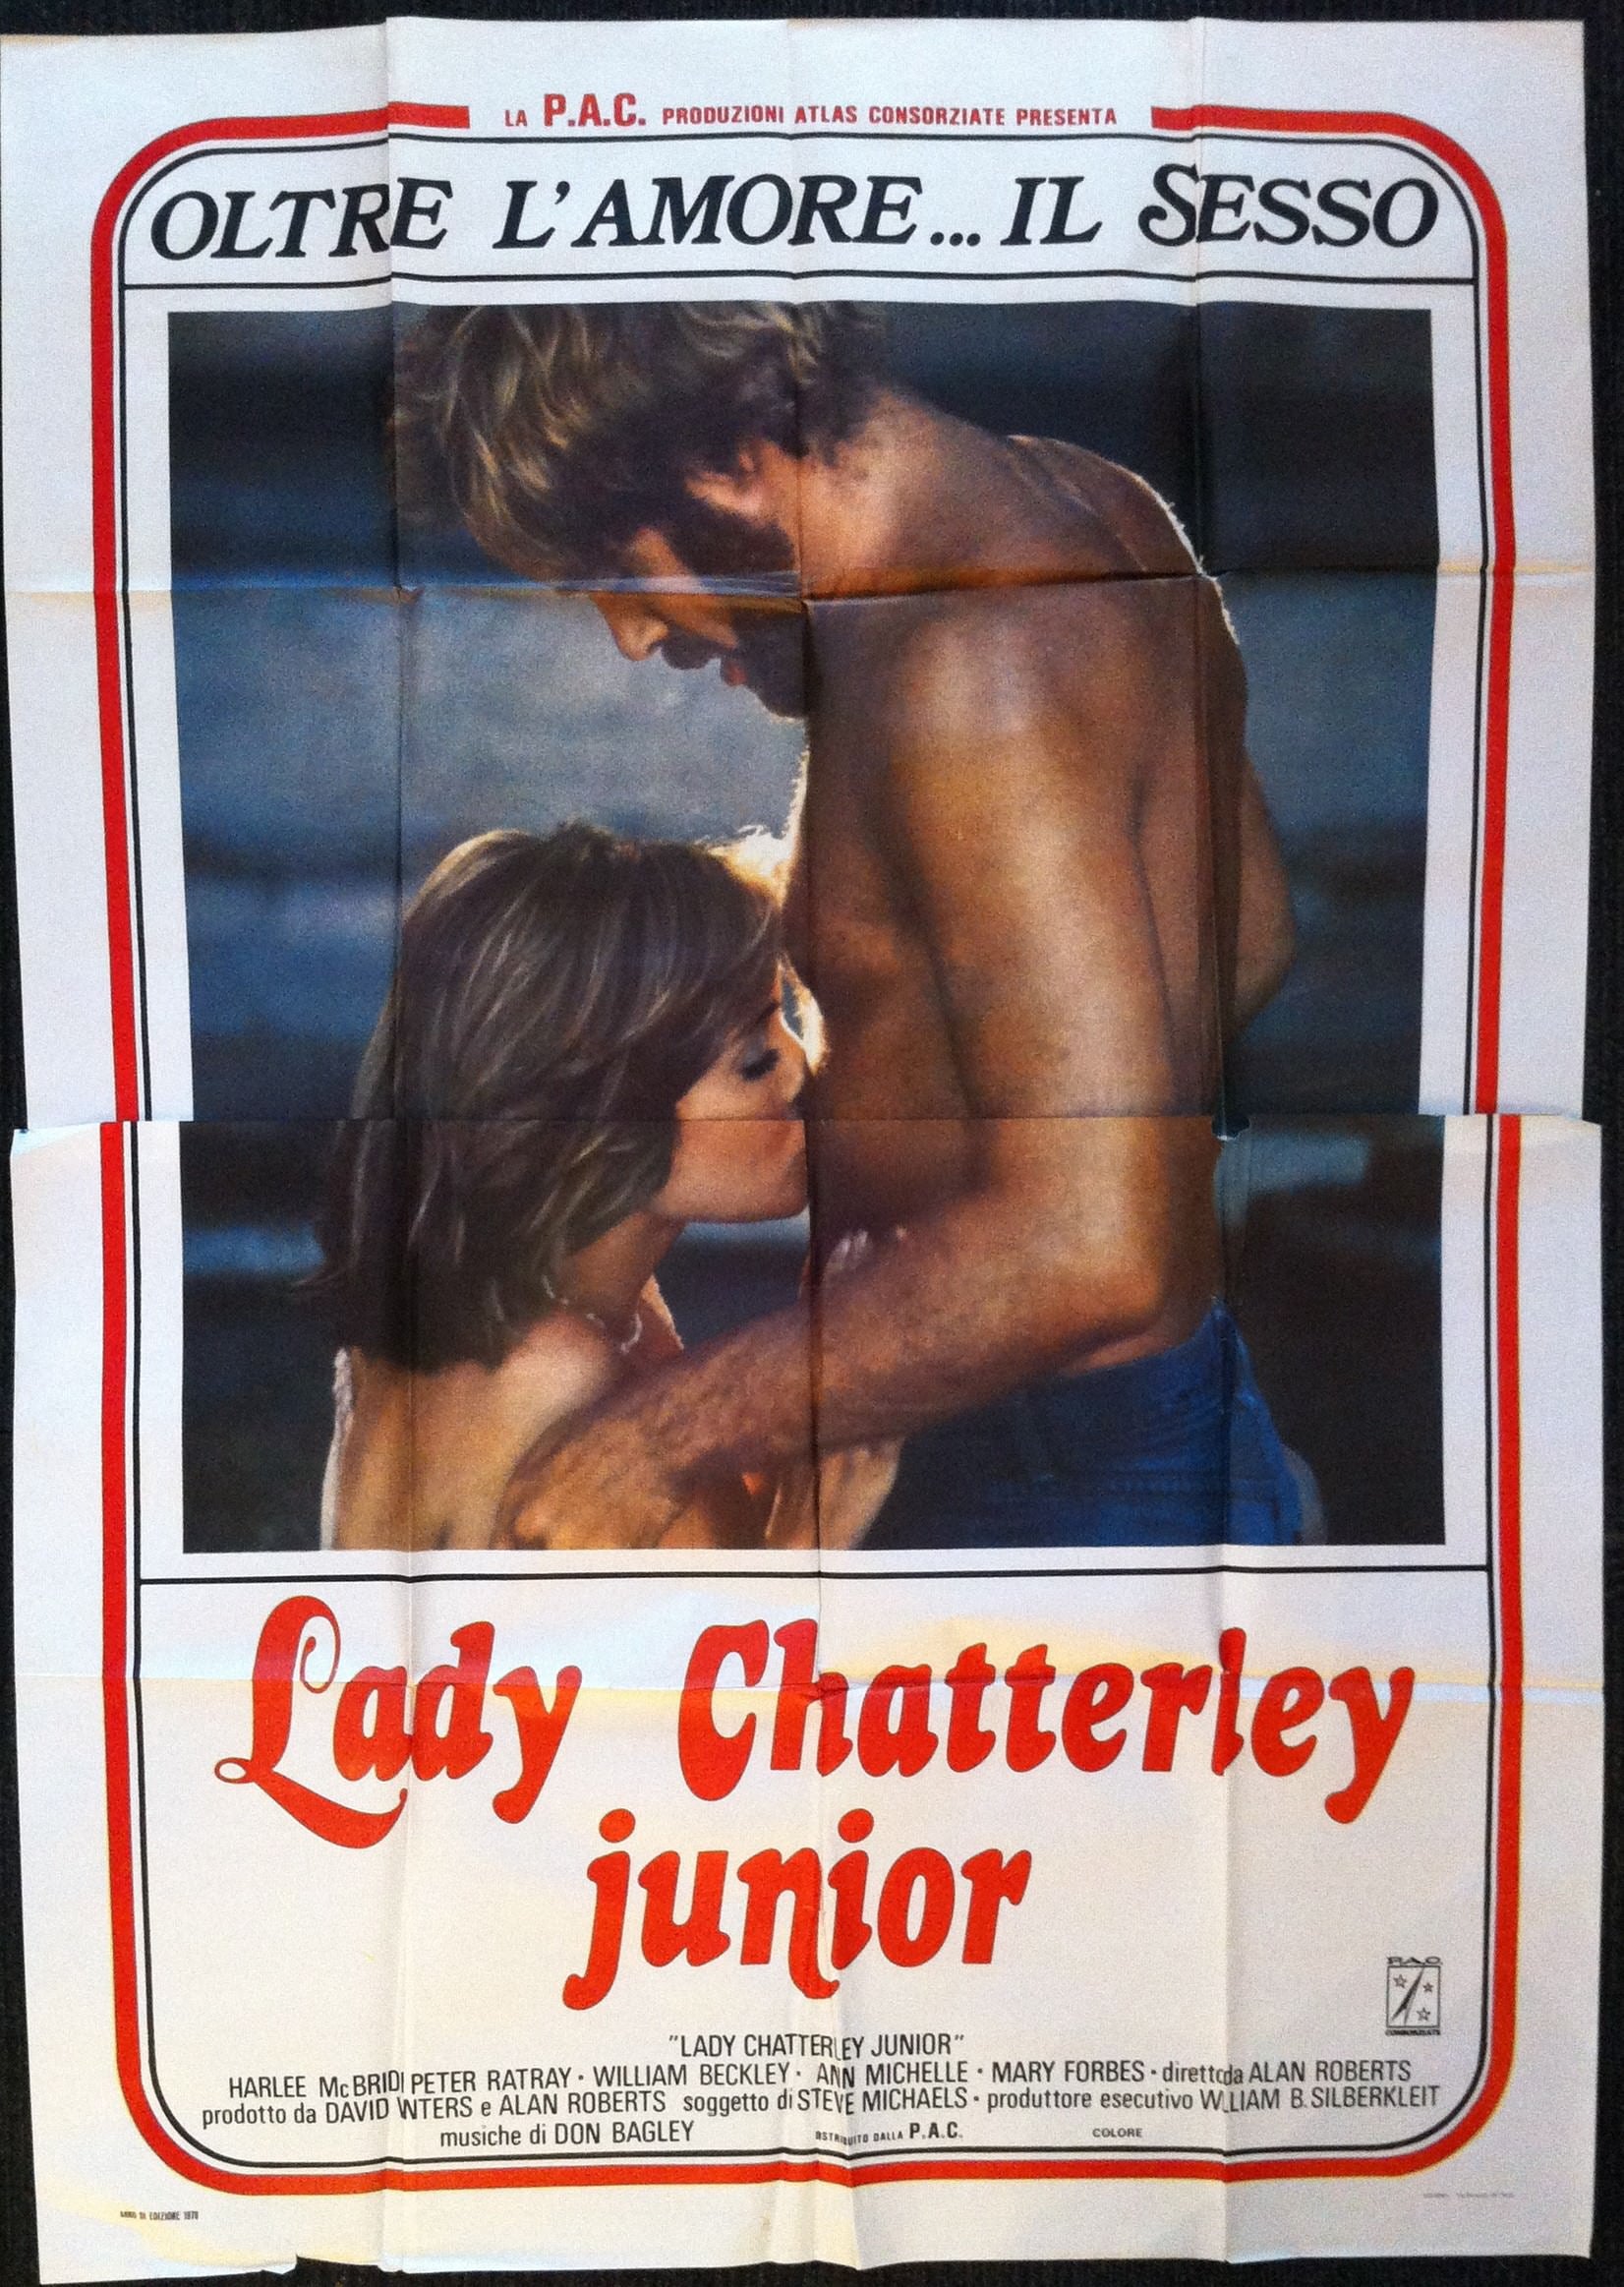 dale warfel share young lady chatterley photos